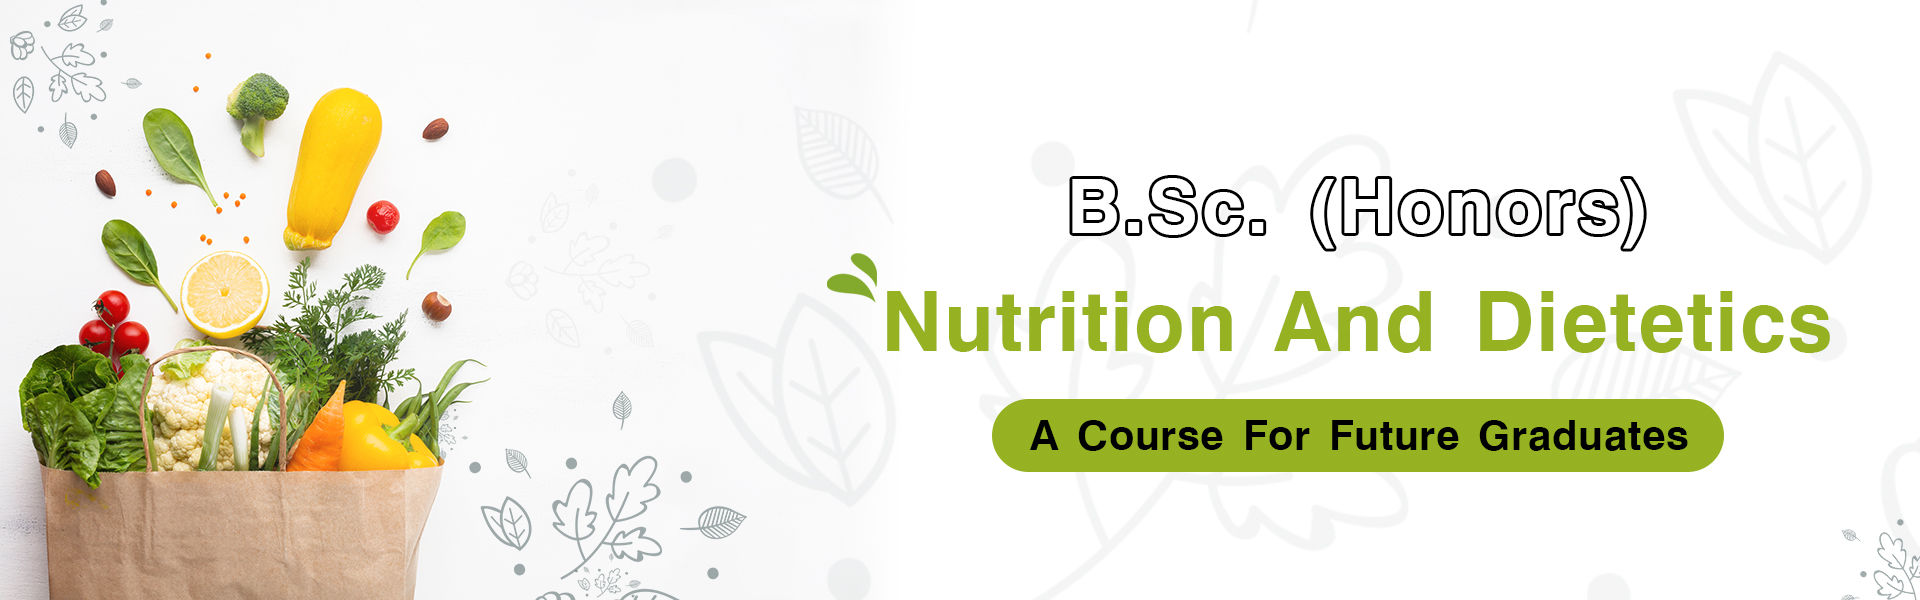 B.Sc. (Honors) Nutrition And Dietetics: A Course For Future Graduates 